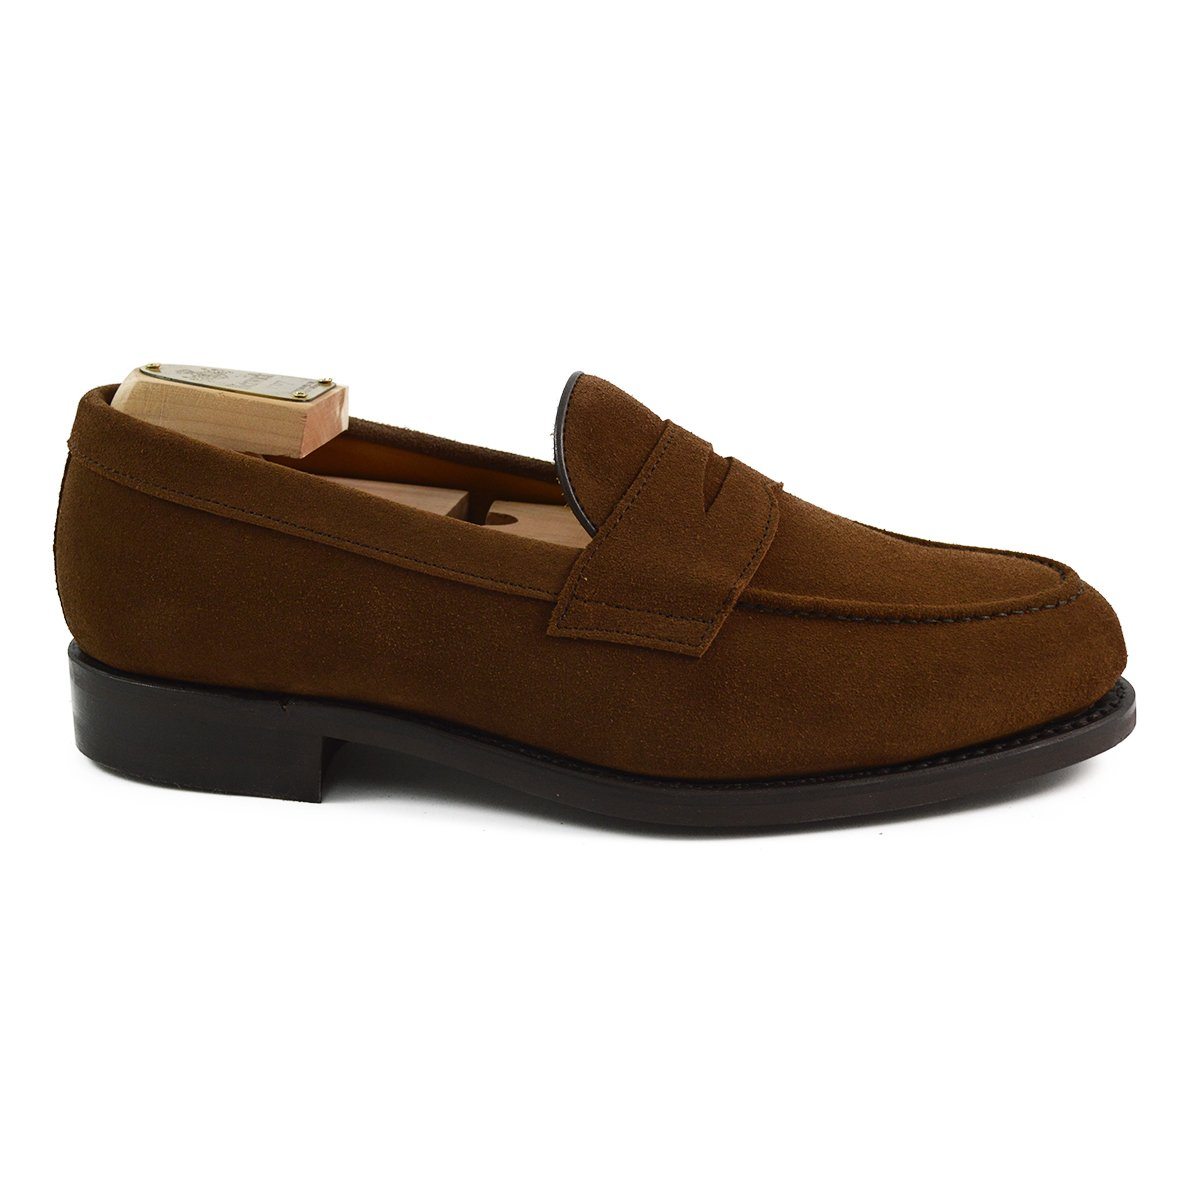 Berwick 1707 Penny Loafer (9628) - Snuff Suede Dainite – A Fine Pair of ...